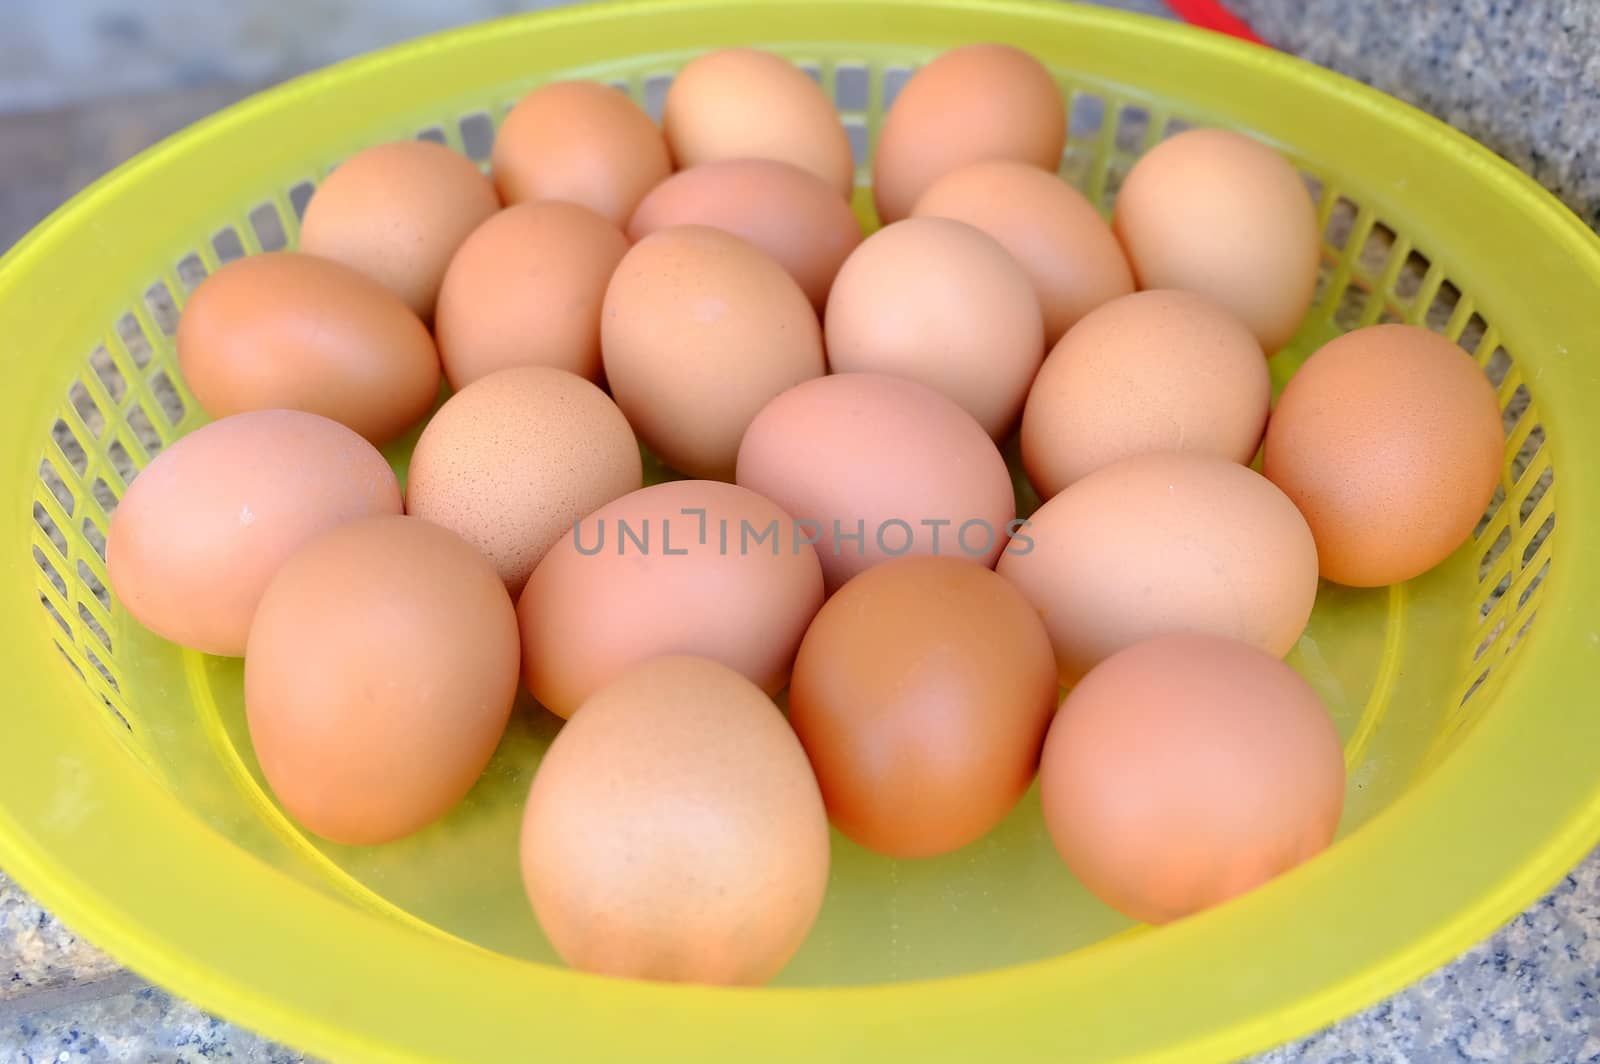 Eggs in Yellow Plastic Tray. by mesamong